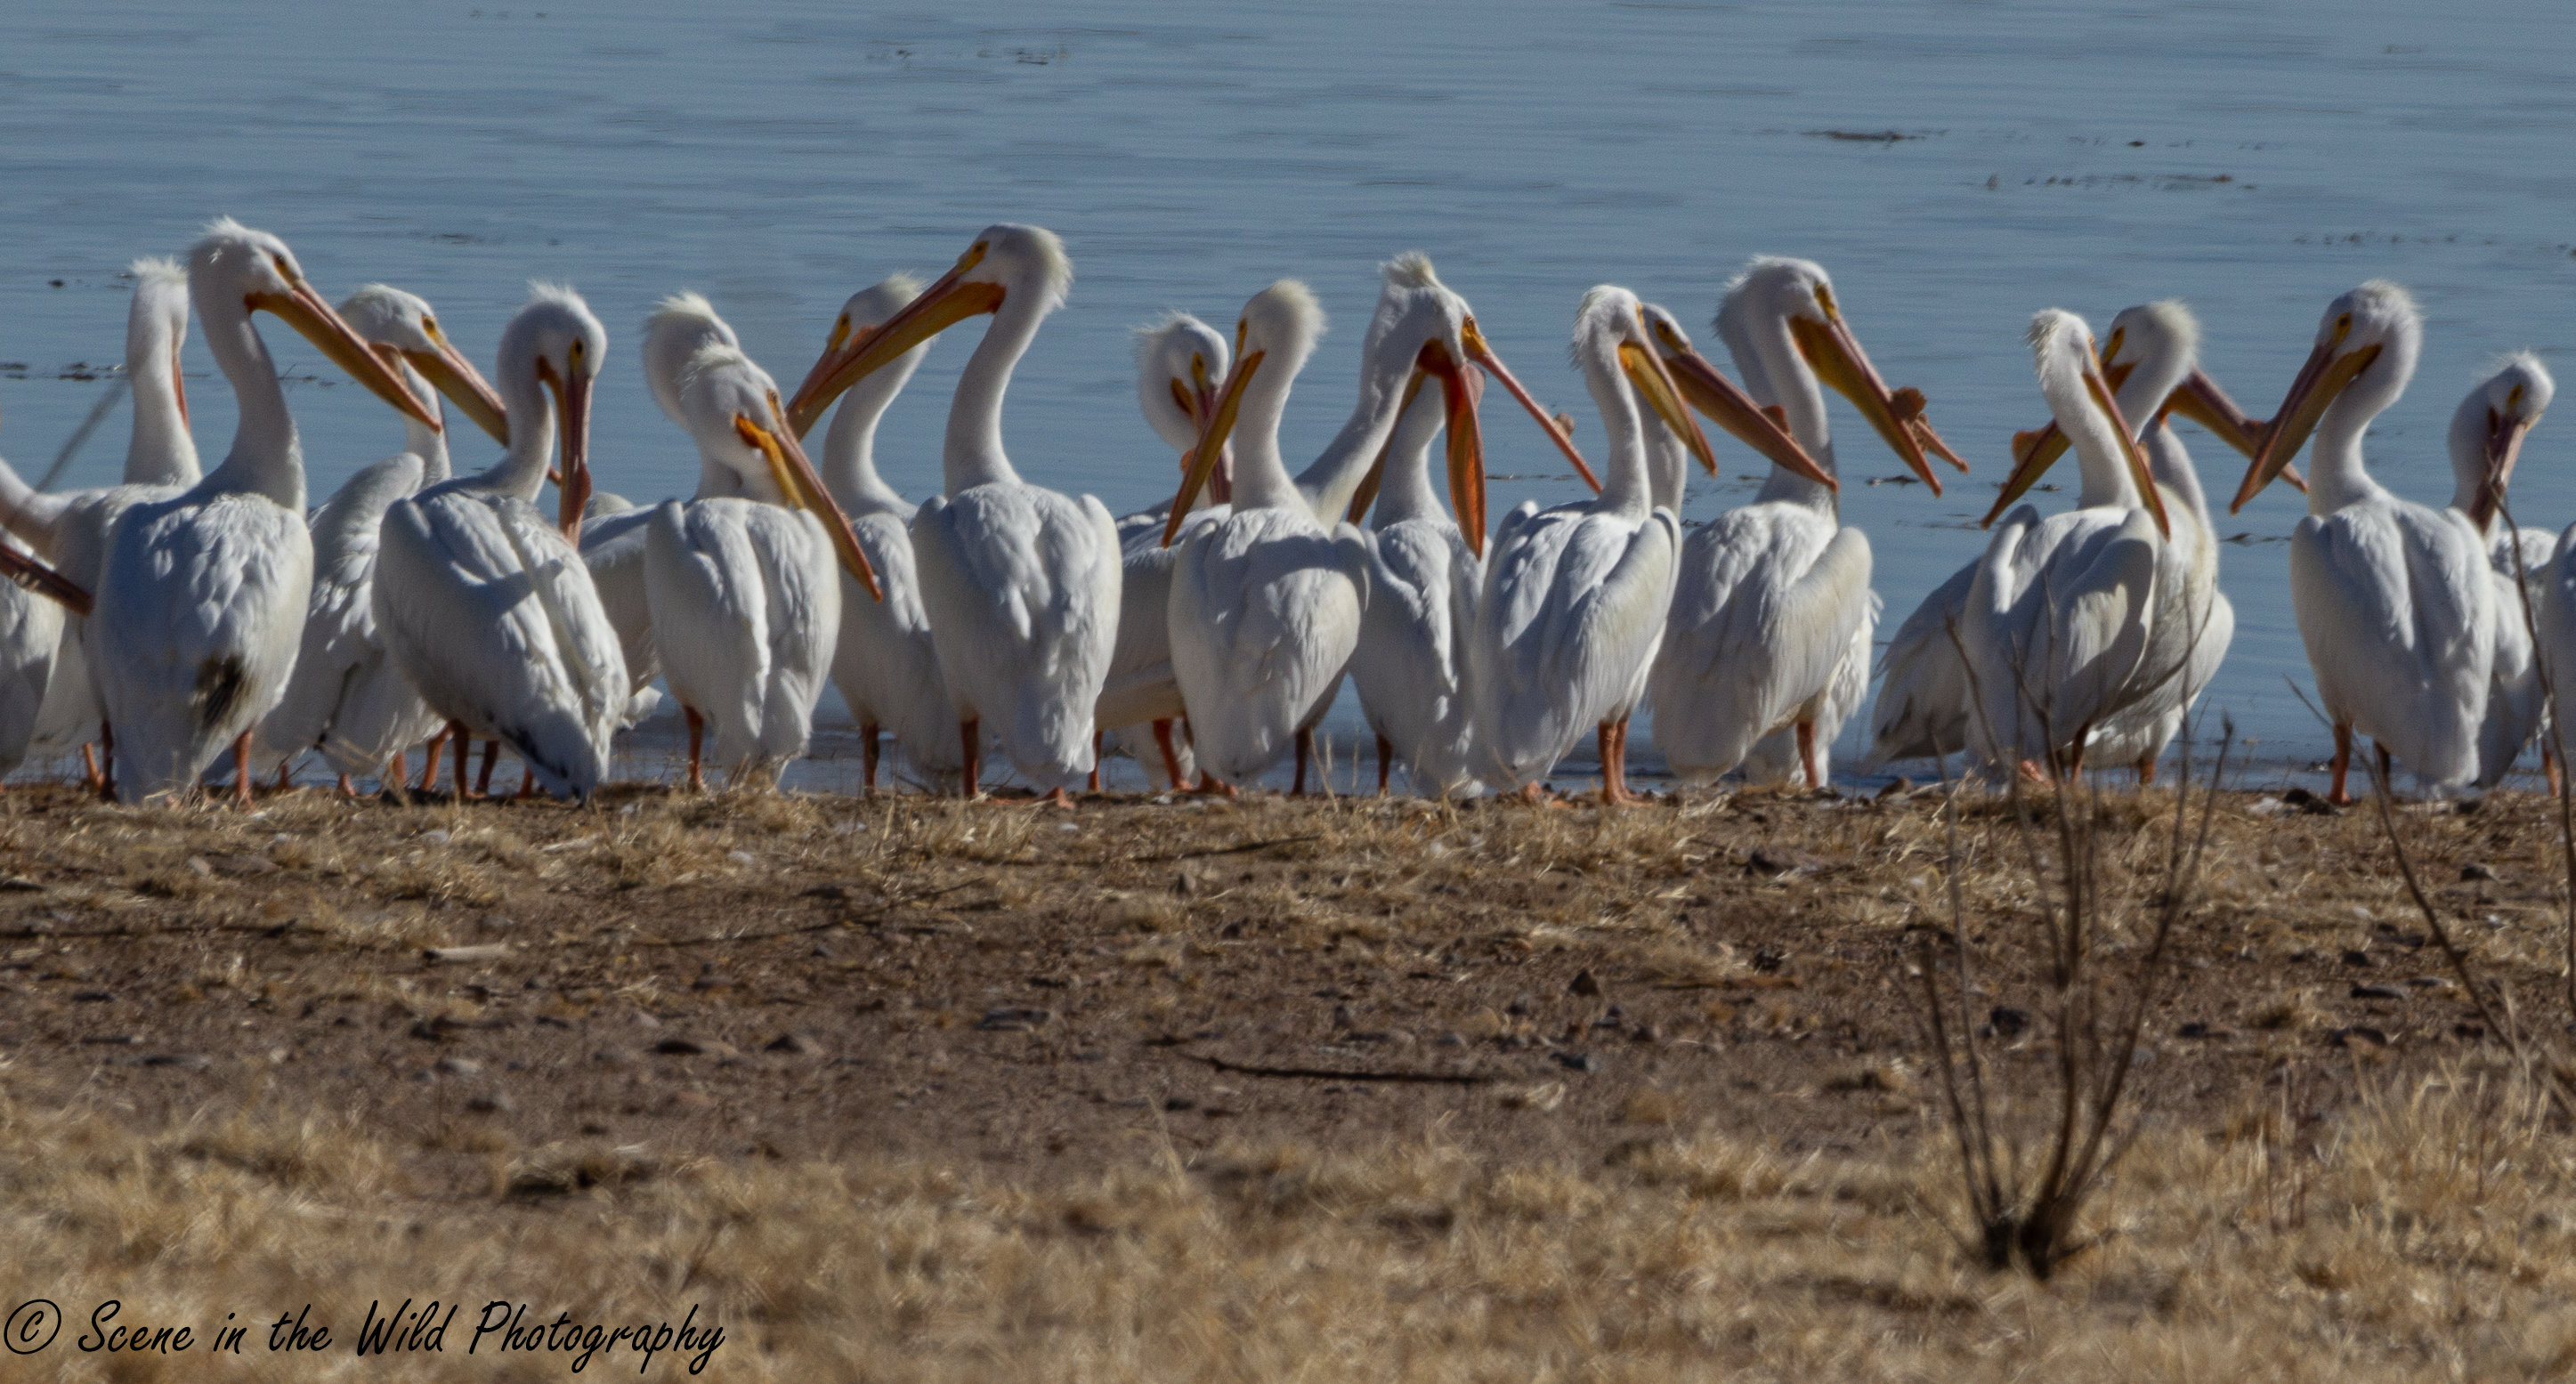 White Pelicans Scene in the Wild Photography SECO News seconews.org 